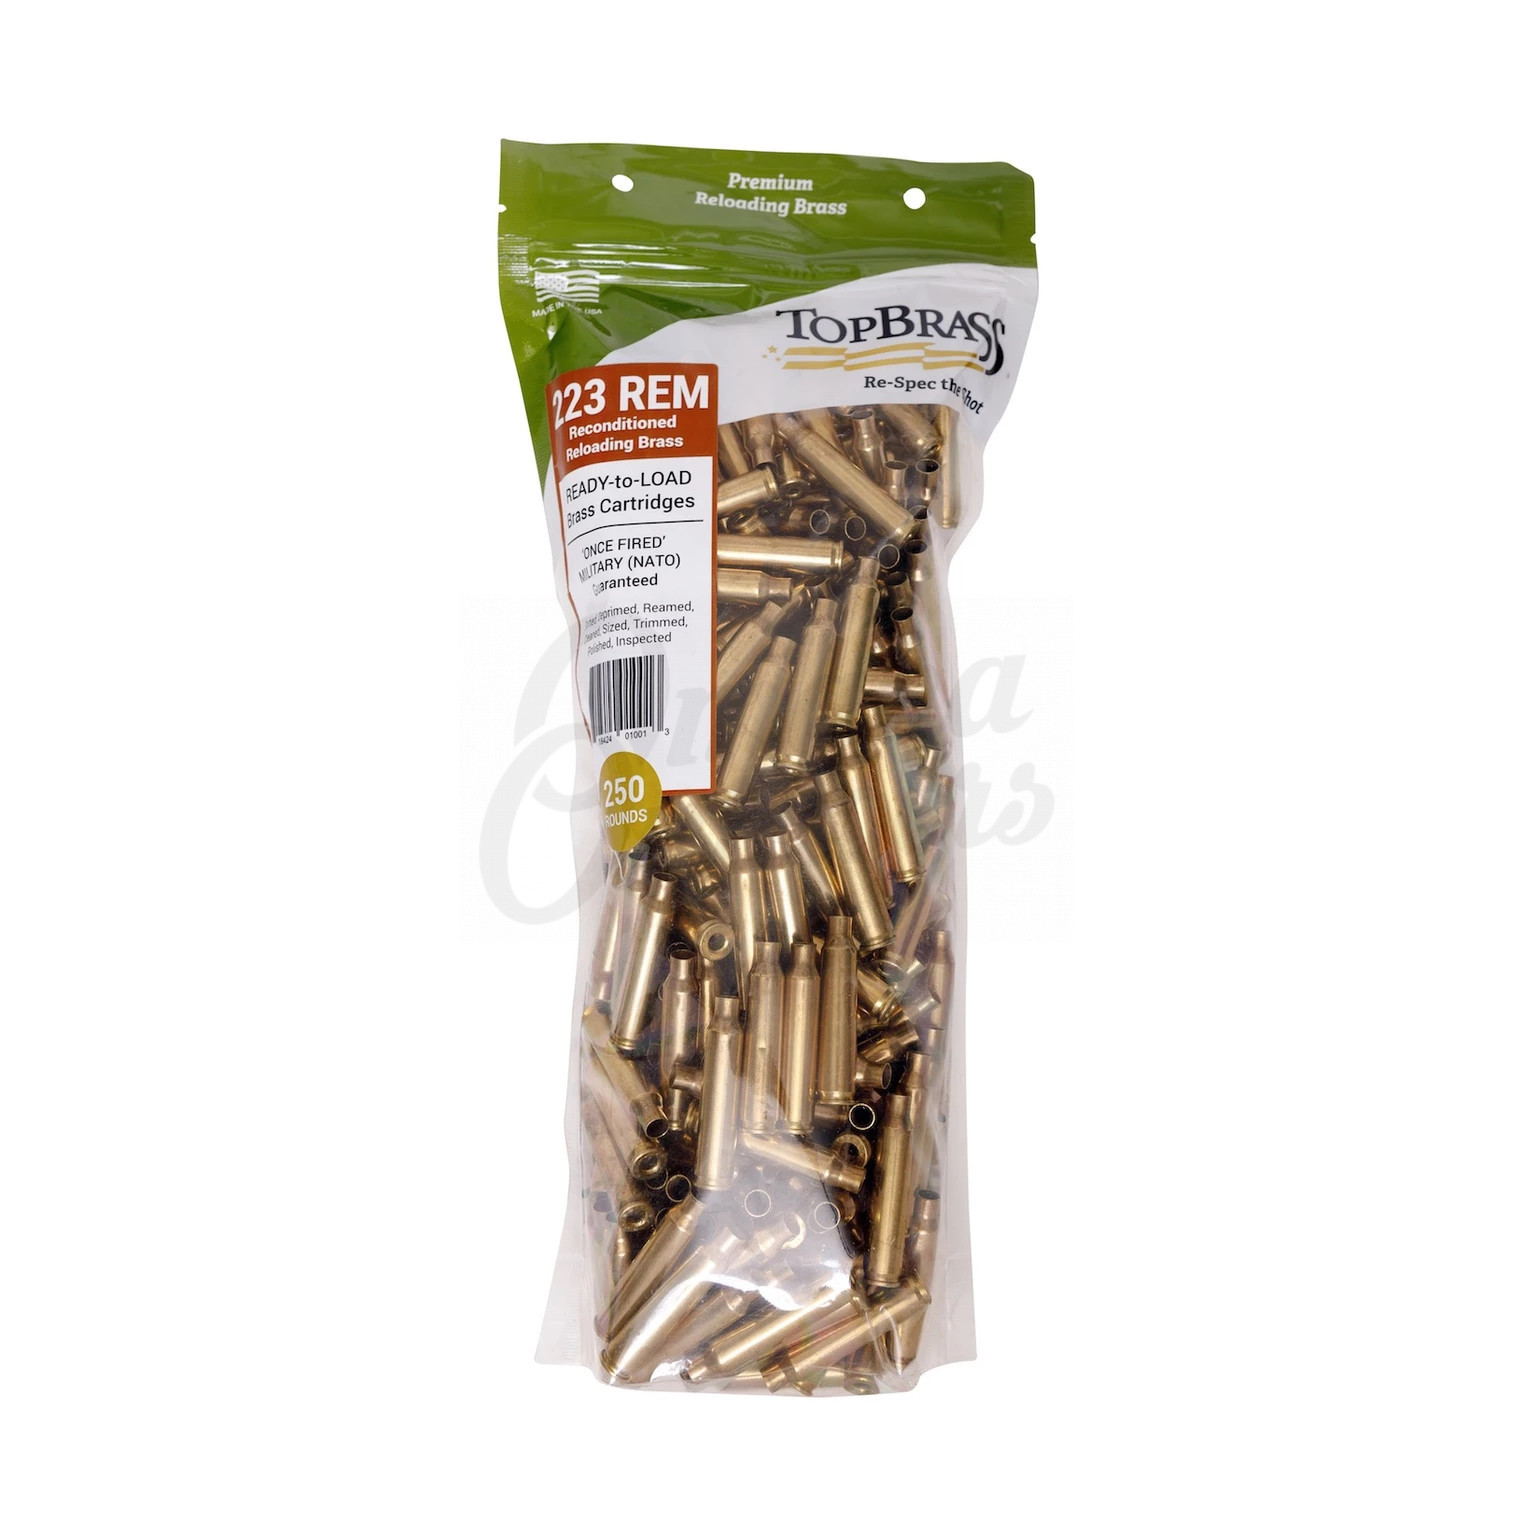 Top Brass 223 Rem Premium Reconditioned Brass 250 Round Bag - Omaha Outdoors